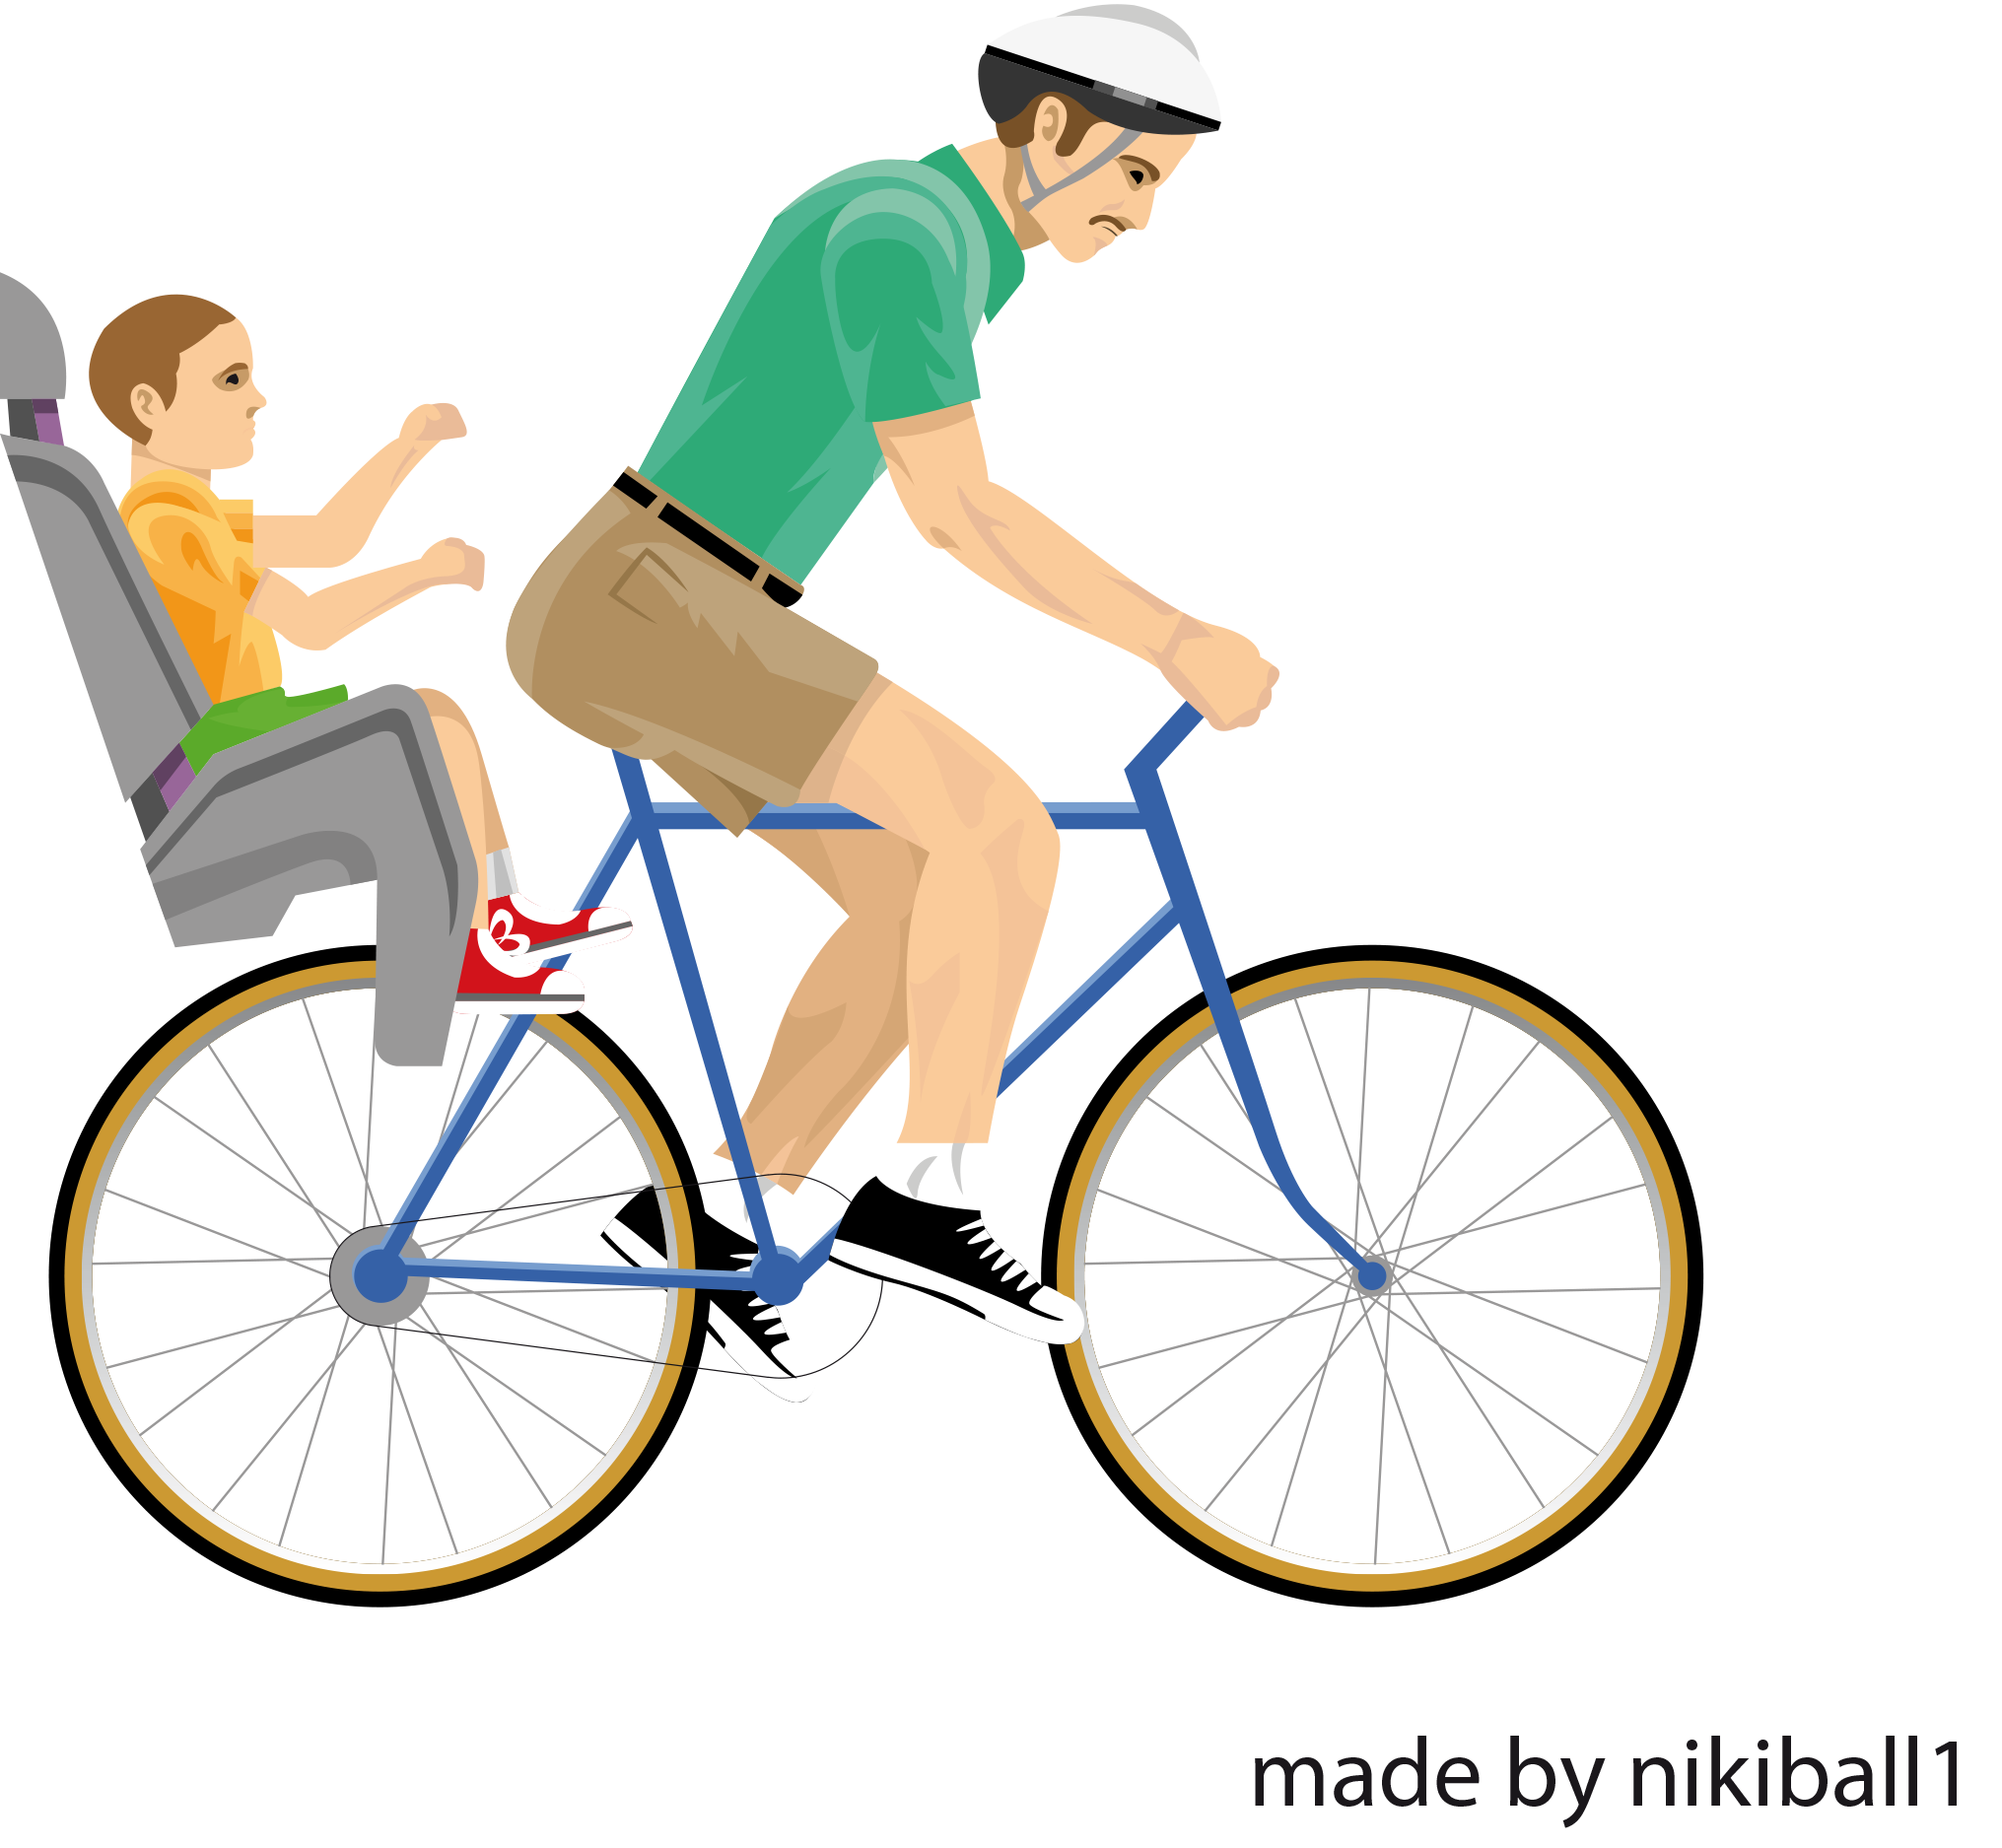 Download Free Roblox Bicycle Character Player Wheels Racing Happy Icon Favicon Freepngimg - roblox player icon download